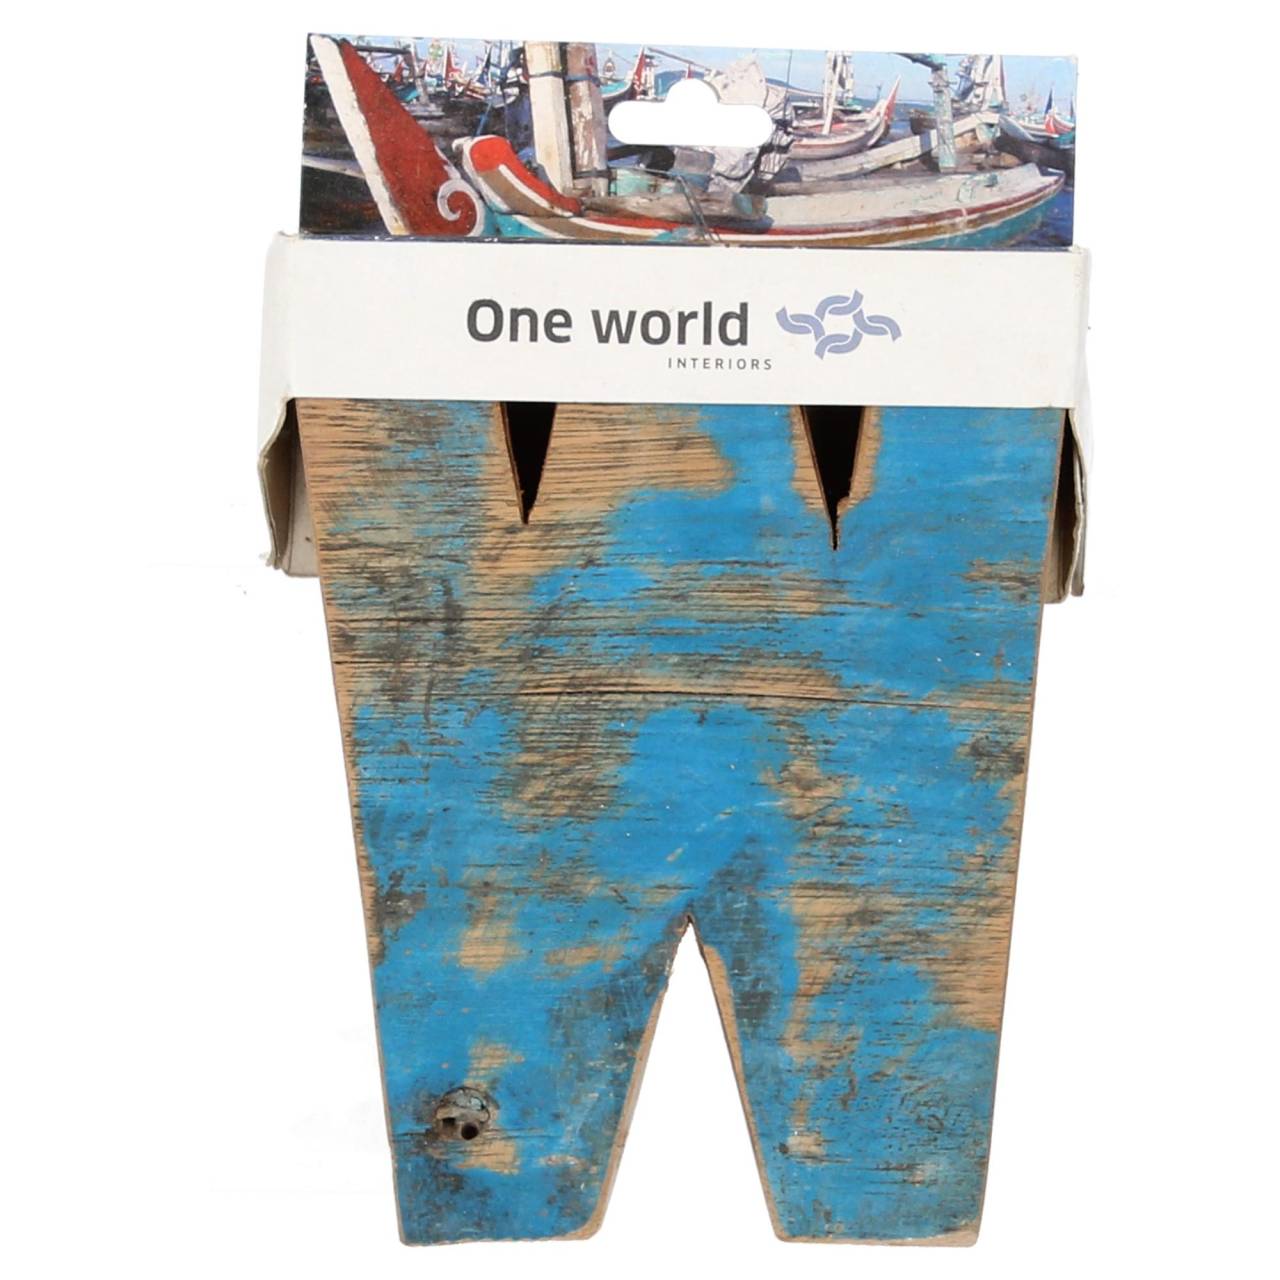 One World Interiors Buchstabe W aus Recyclingholz Holzbuchstaben Upcycling